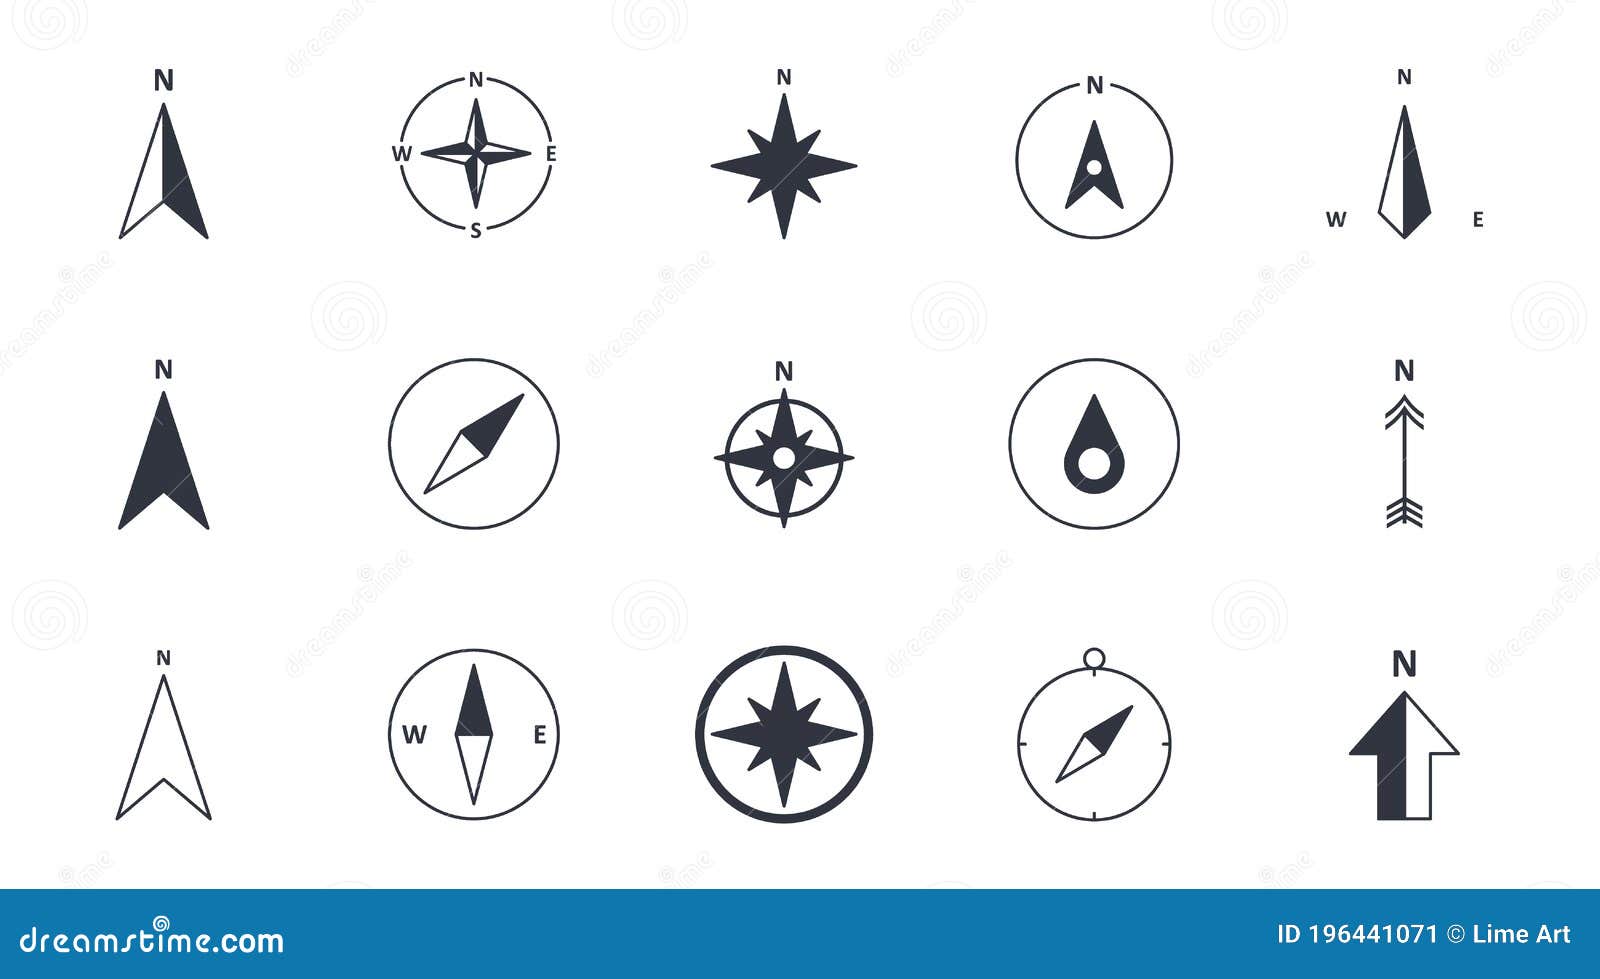 Compass icon wind map north west Royalty Free Vector Image